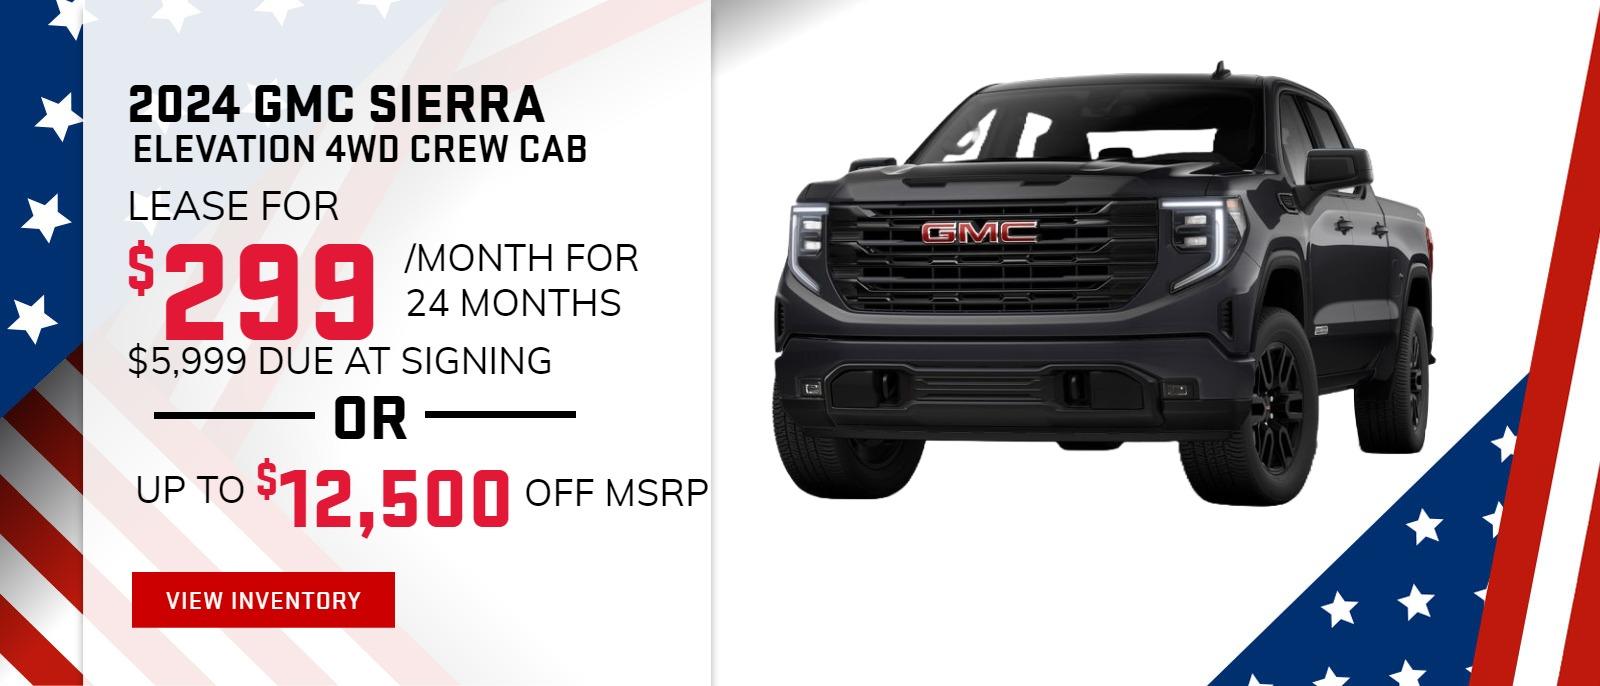 2024 GMC SIERRA ELEVATION 4WD CREW CAB
$299 Per month / 24 Month lease / $5999 due at signing 
Up to $12,500 off MSRP